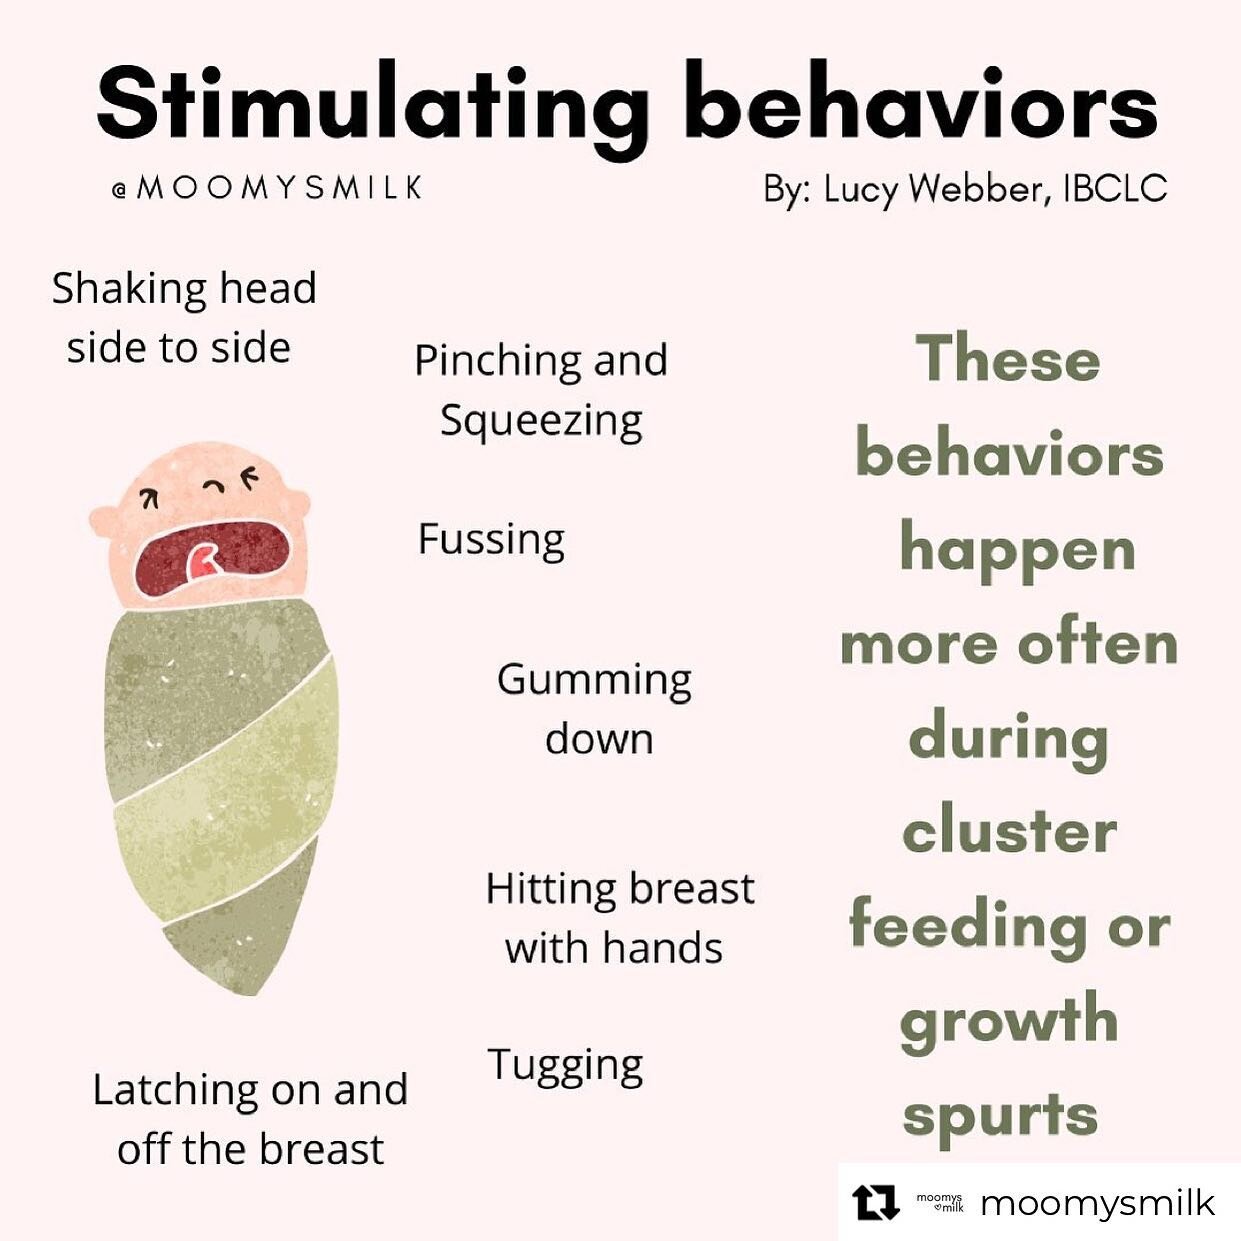 Repost from @moomysmilk
&bull;
&ldquo;There are certain behaviors that all babies do at some point to stimulate milk flow and supply, and these are normal. If you have any concerns about your supply seek trained support.&rdquo; 
✏️ Lucy Webber IBCLC